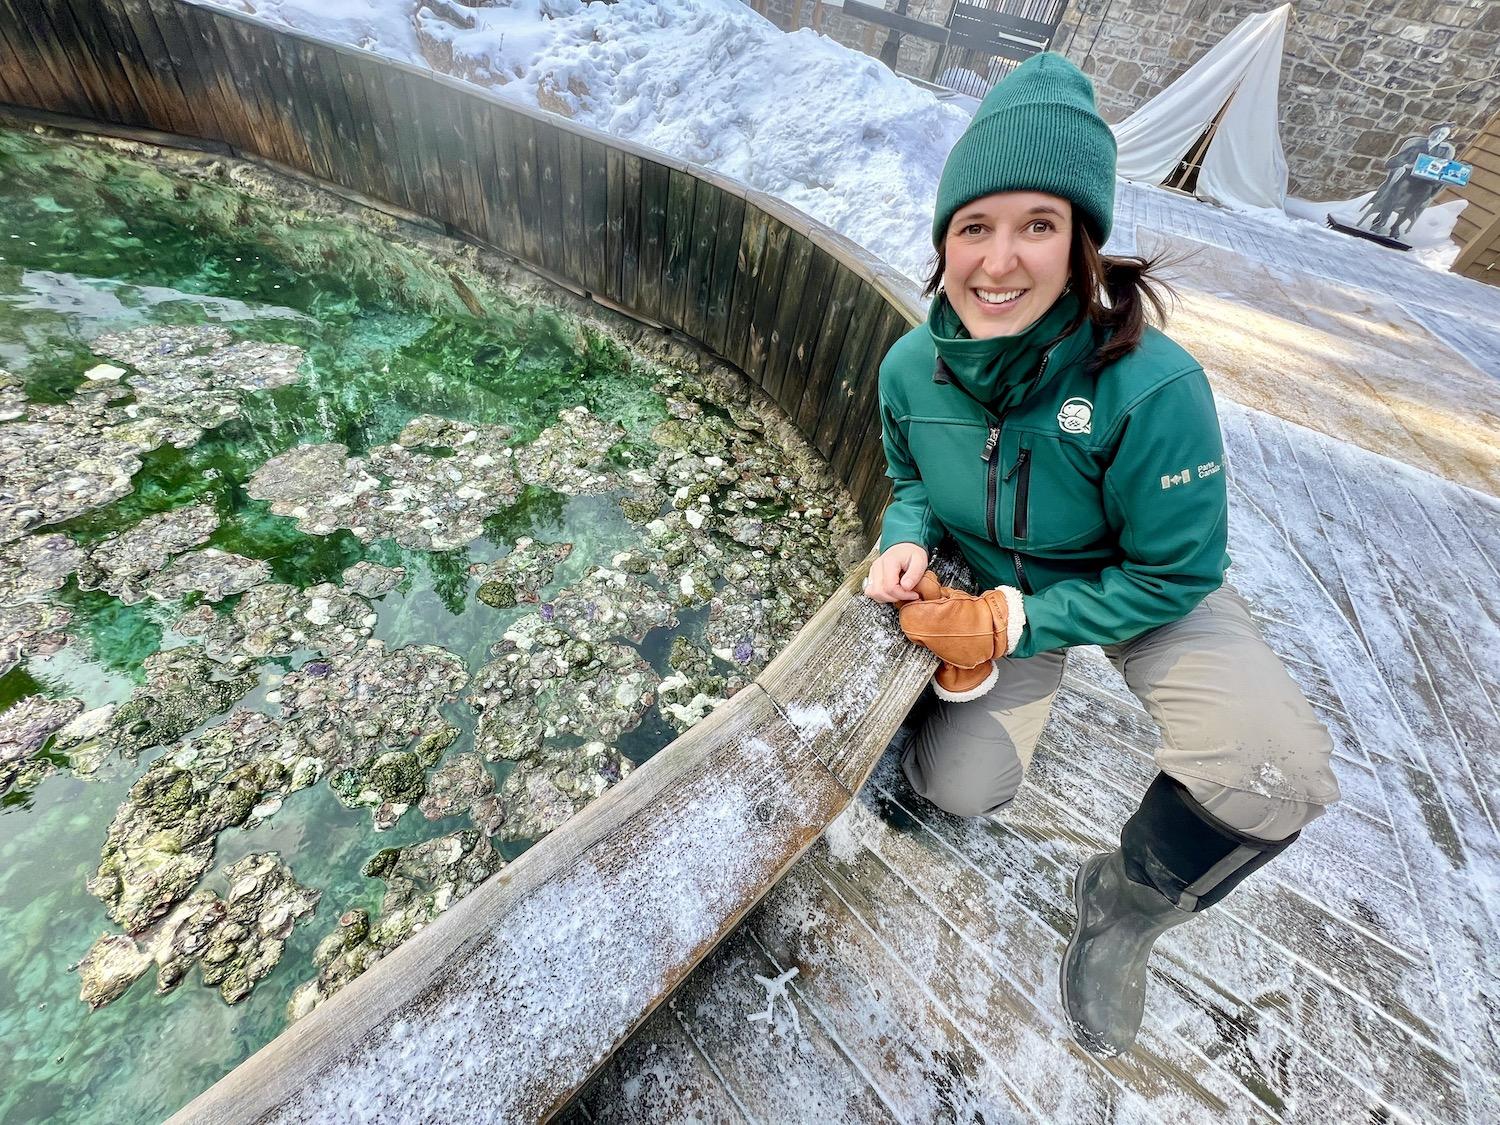 Kate Keenan, a resource conservation officer with Parks Canada, is shown at "the Basin" at Cave and Basin National Historic Site in Banff National Park. It's home to endangered Banff Springs Snails.